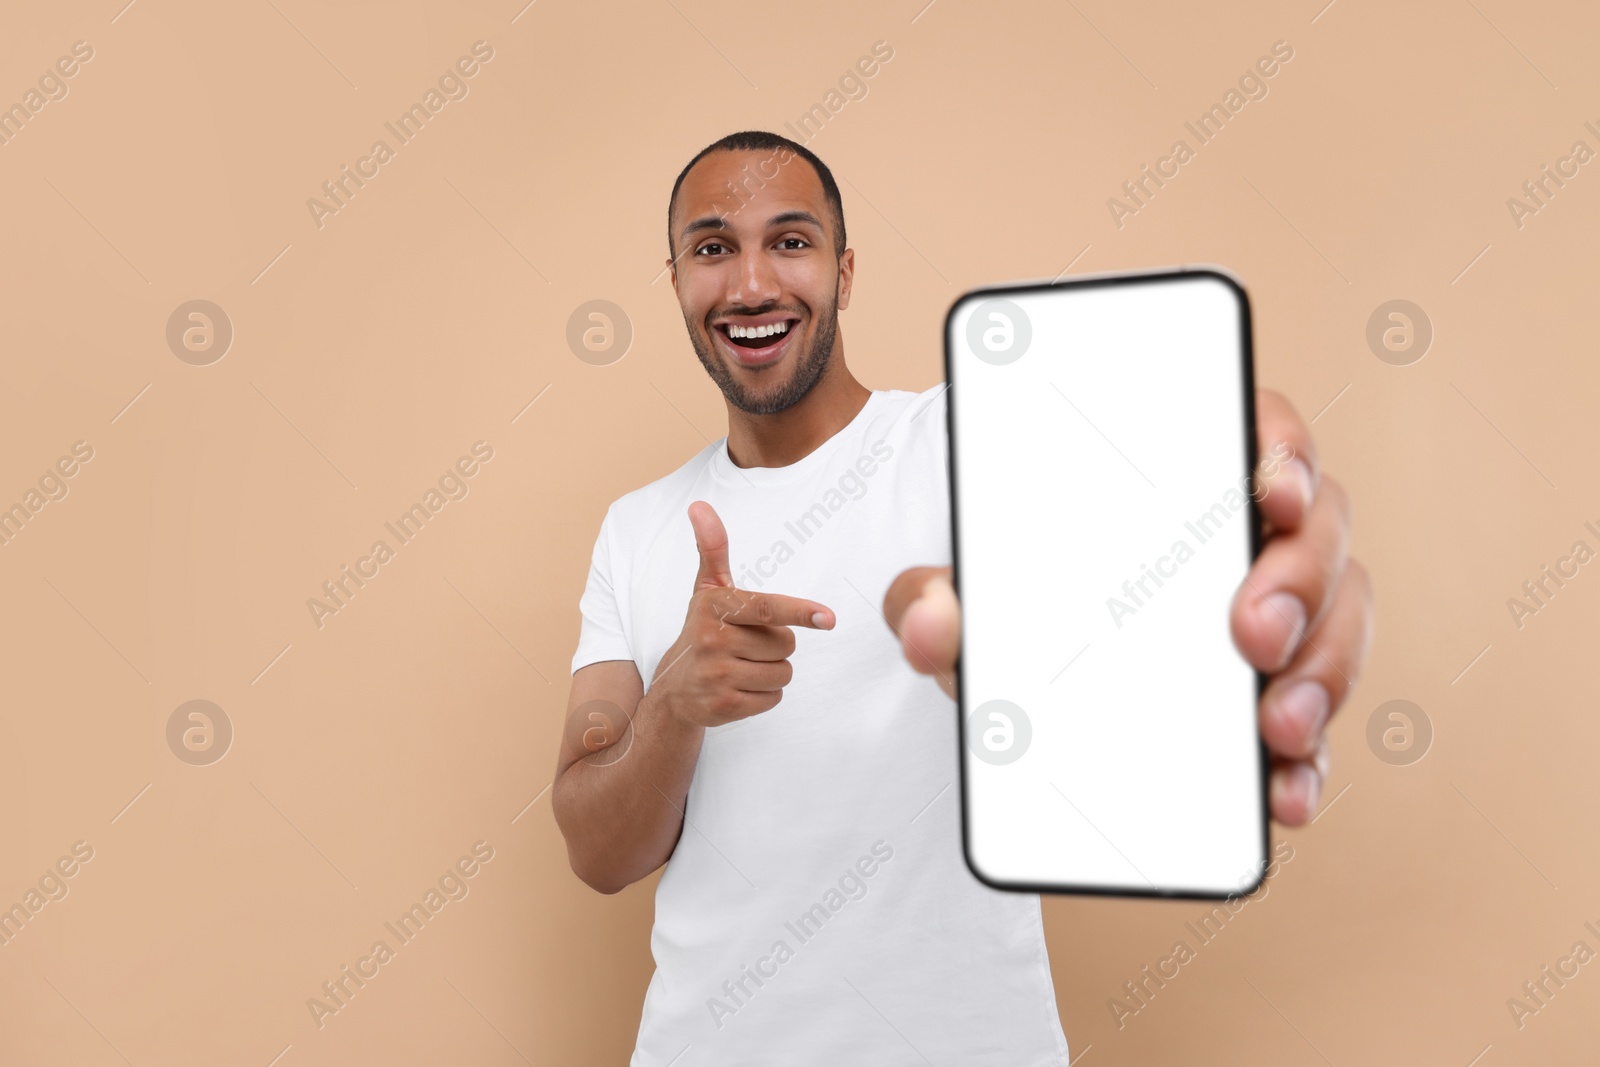 Photo of Young man showing smartphone in hand and pointing at it on beige background